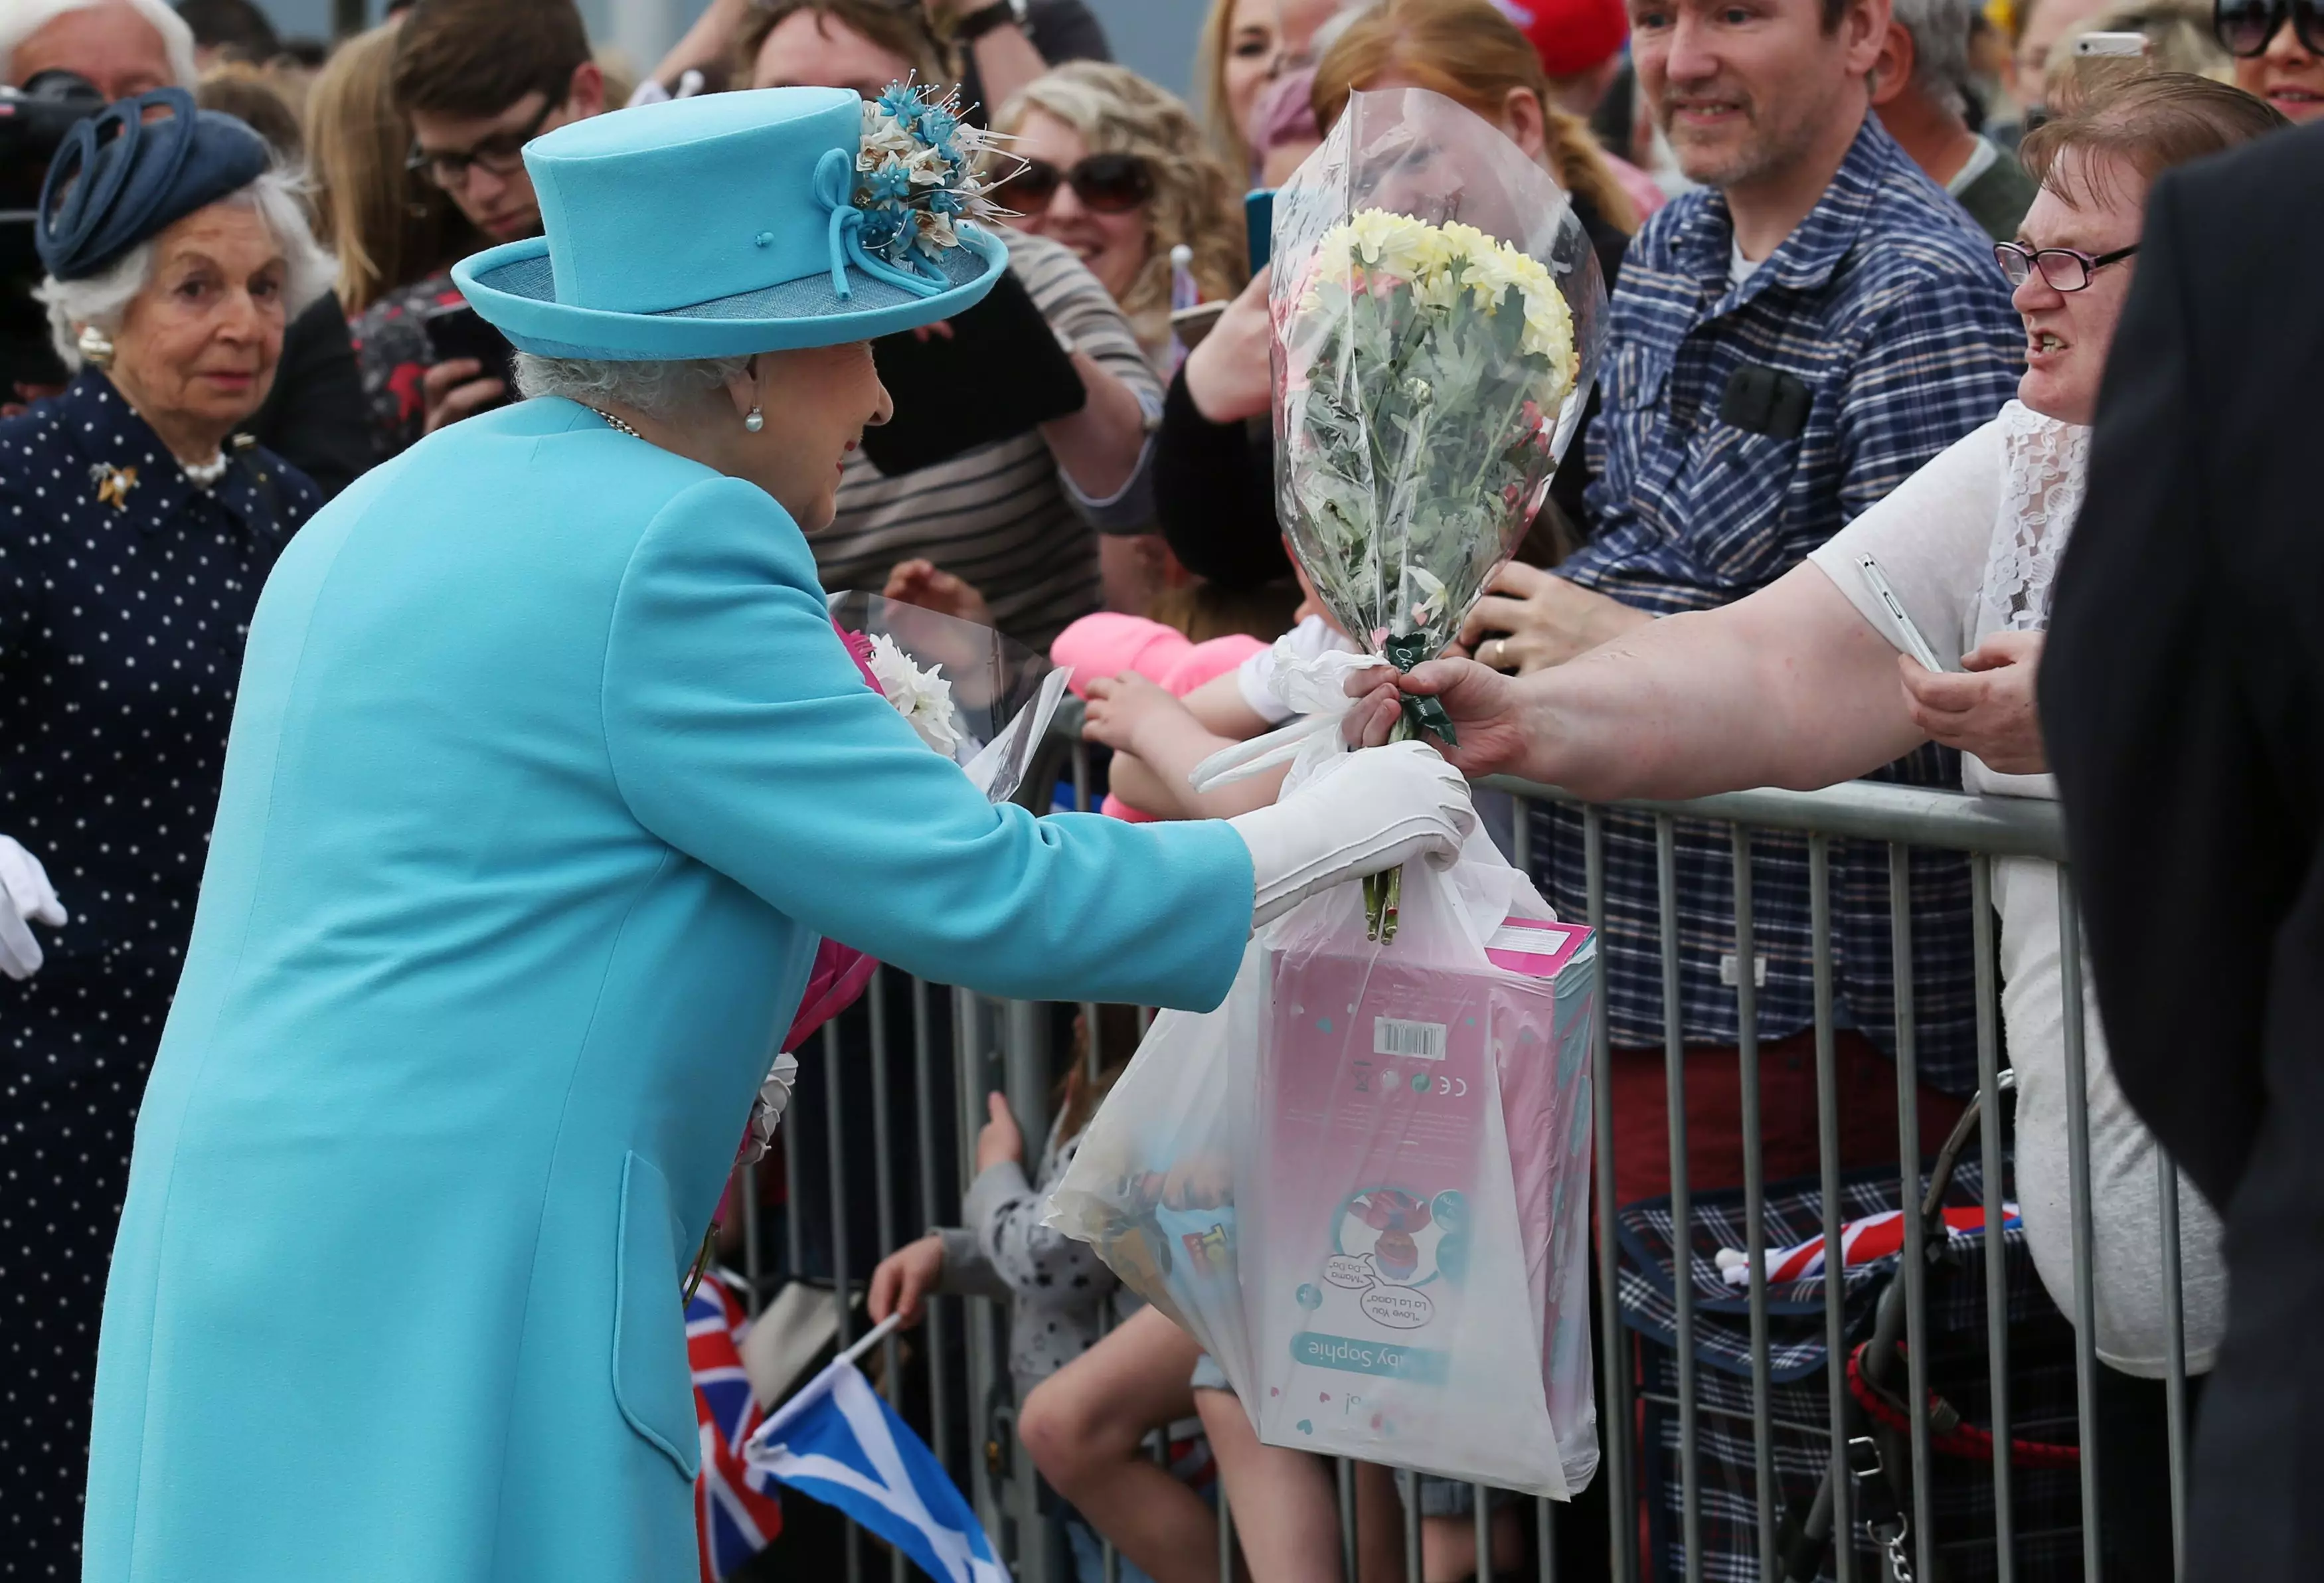 Someone Handed The Queen A B&M Bag Of Toys And She Did Not Look Impressed